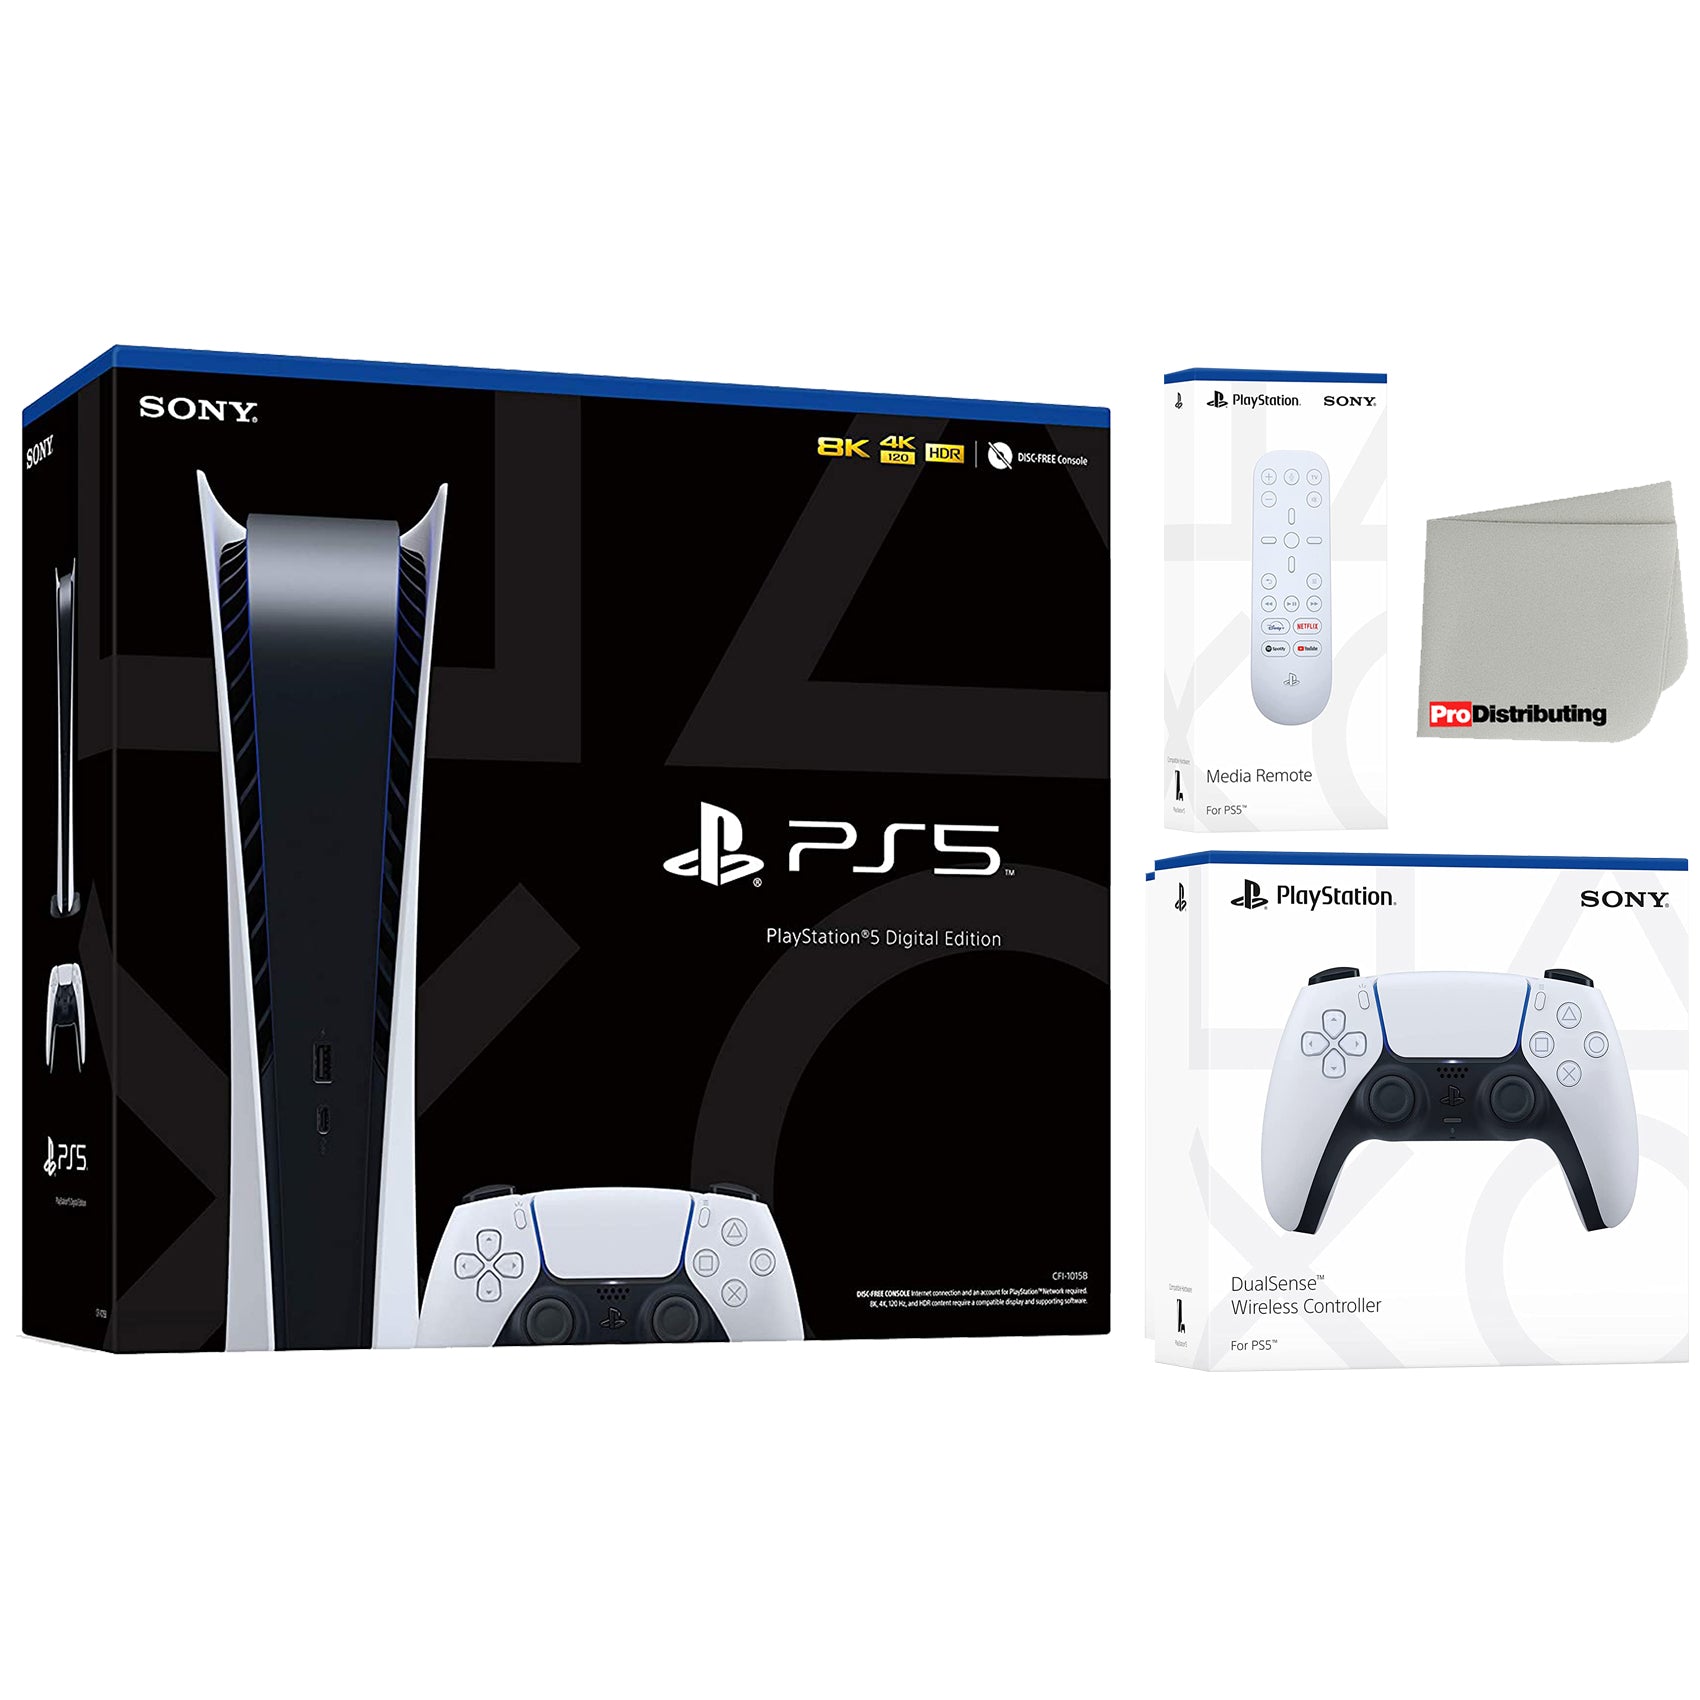 Sony Playstation 5 Digital Version (PS5 Digital) with White Extra Controller, Media Remote and Cleaning Cloth Bundle - Pro-Distributing